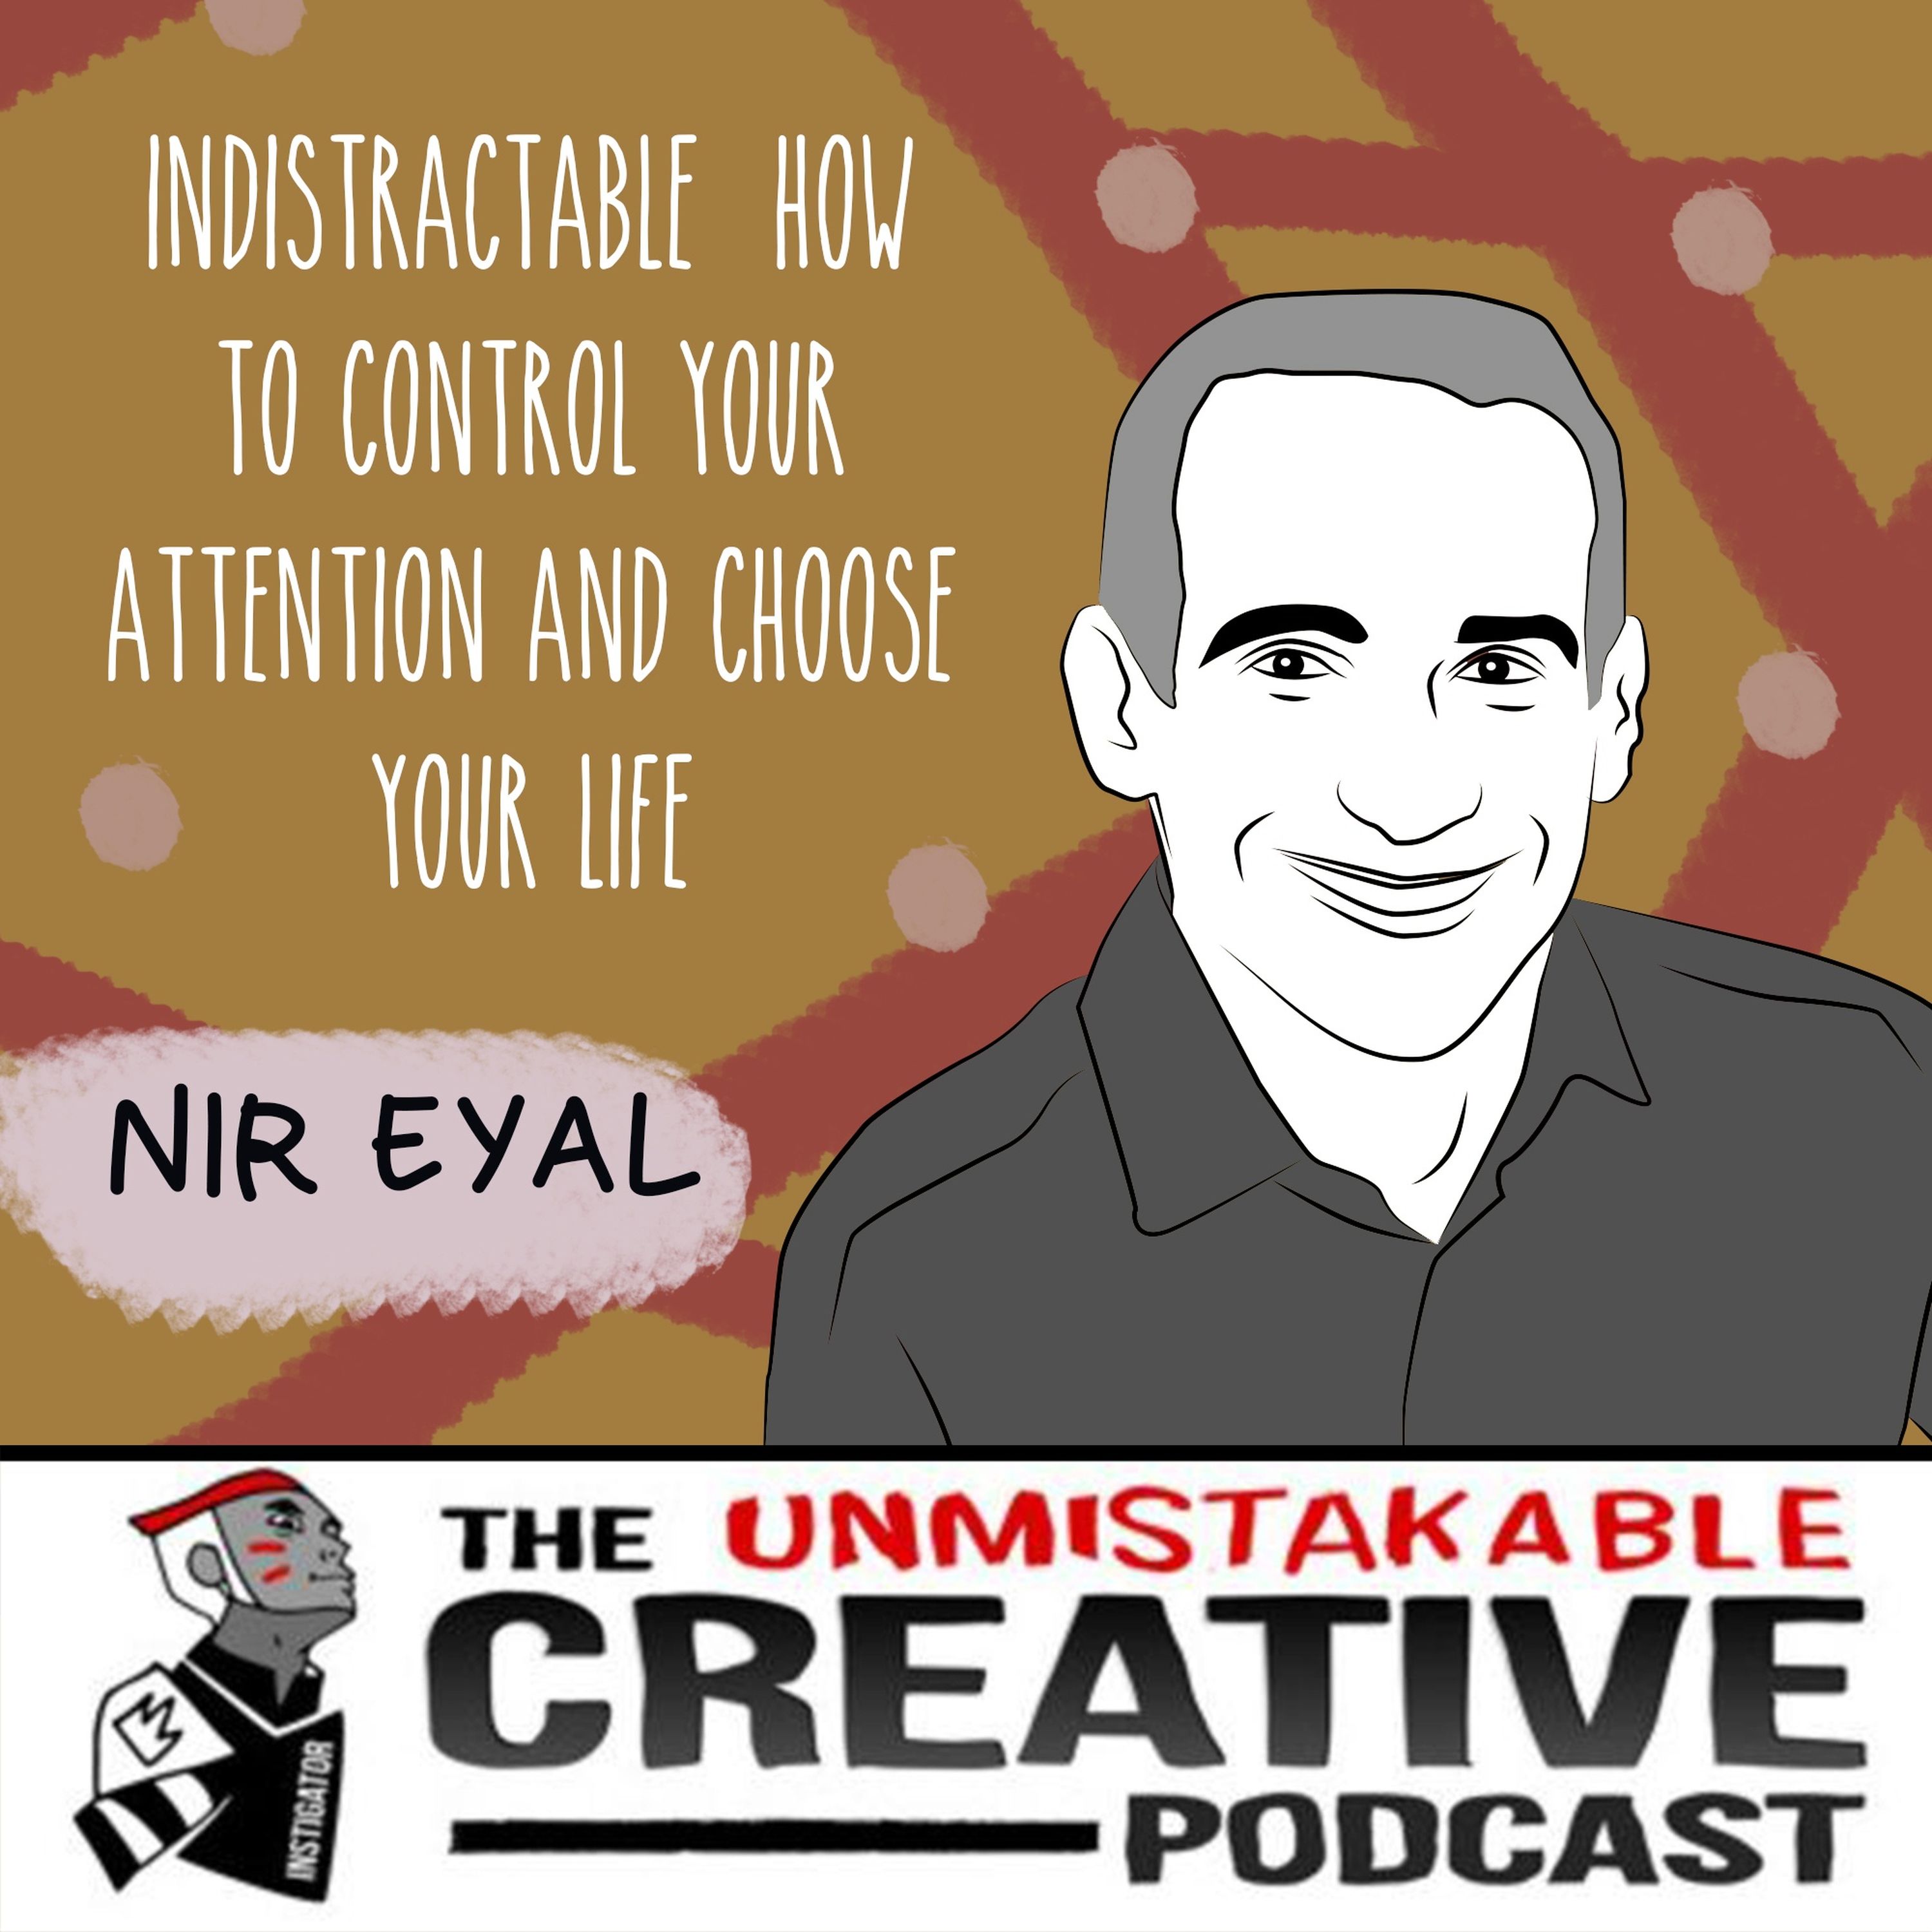 Nir Eyal: Indistractable: How to Control Your Attention and Choose Your Life Image